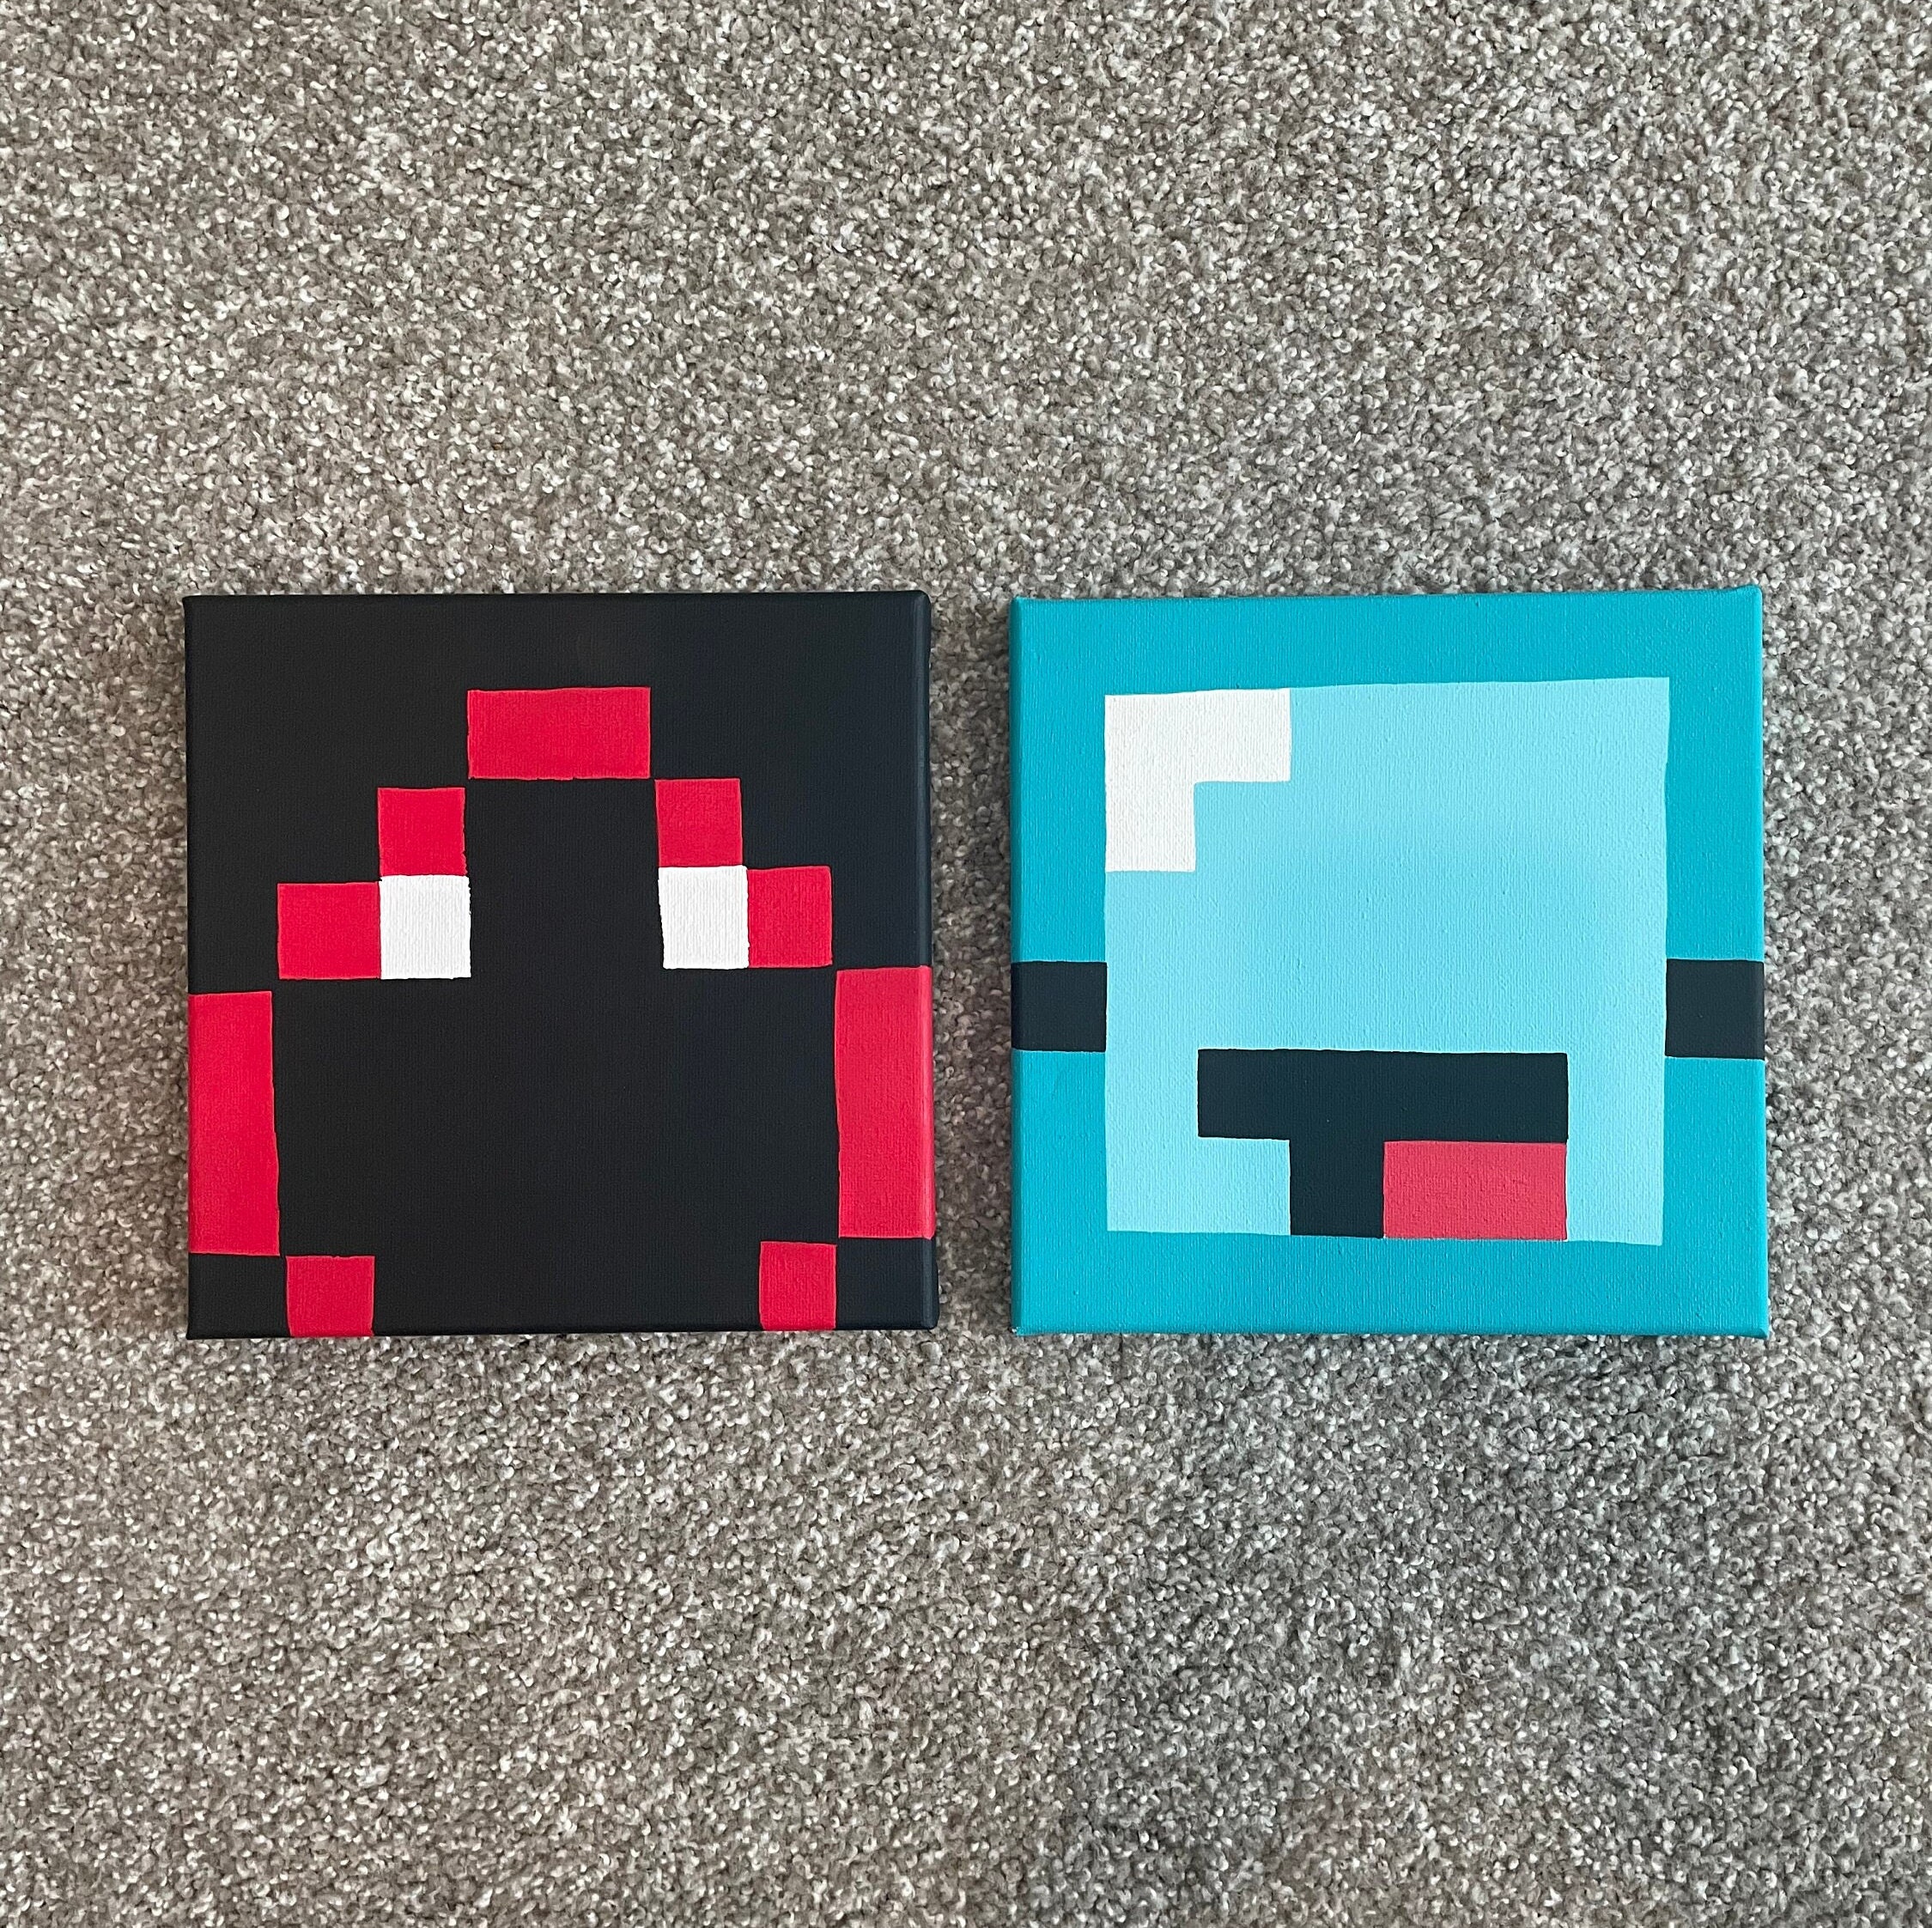 Dream Smp Minecraft Head Paintings Etsy